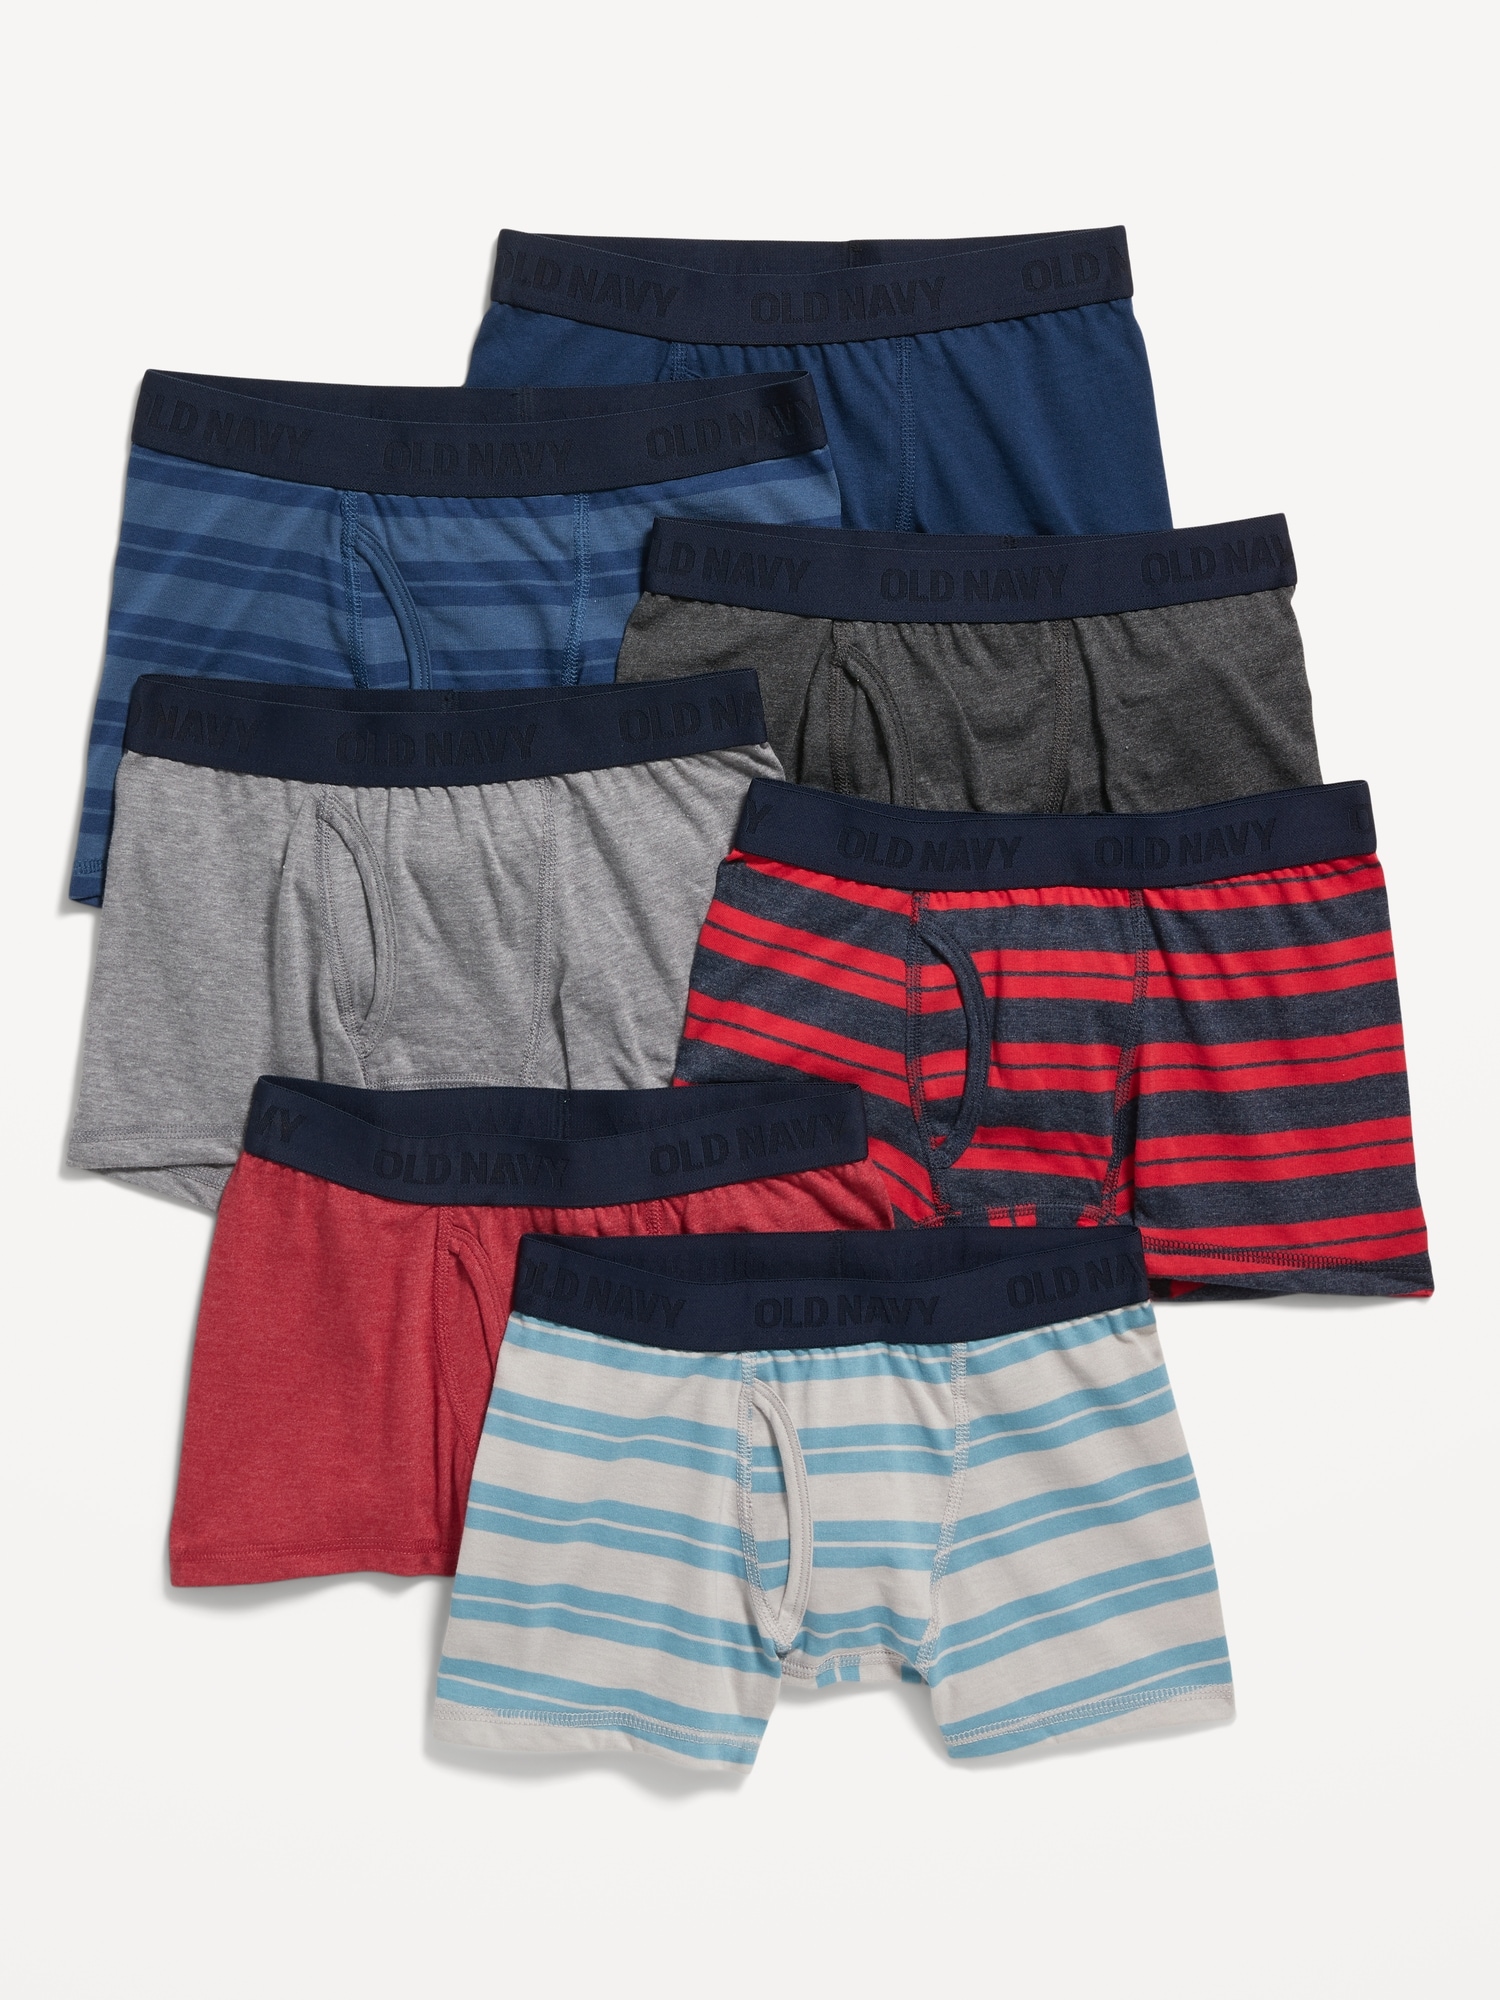 Printed Boxer-Briefs Underwear 7-Pack for Boys | Old Navy